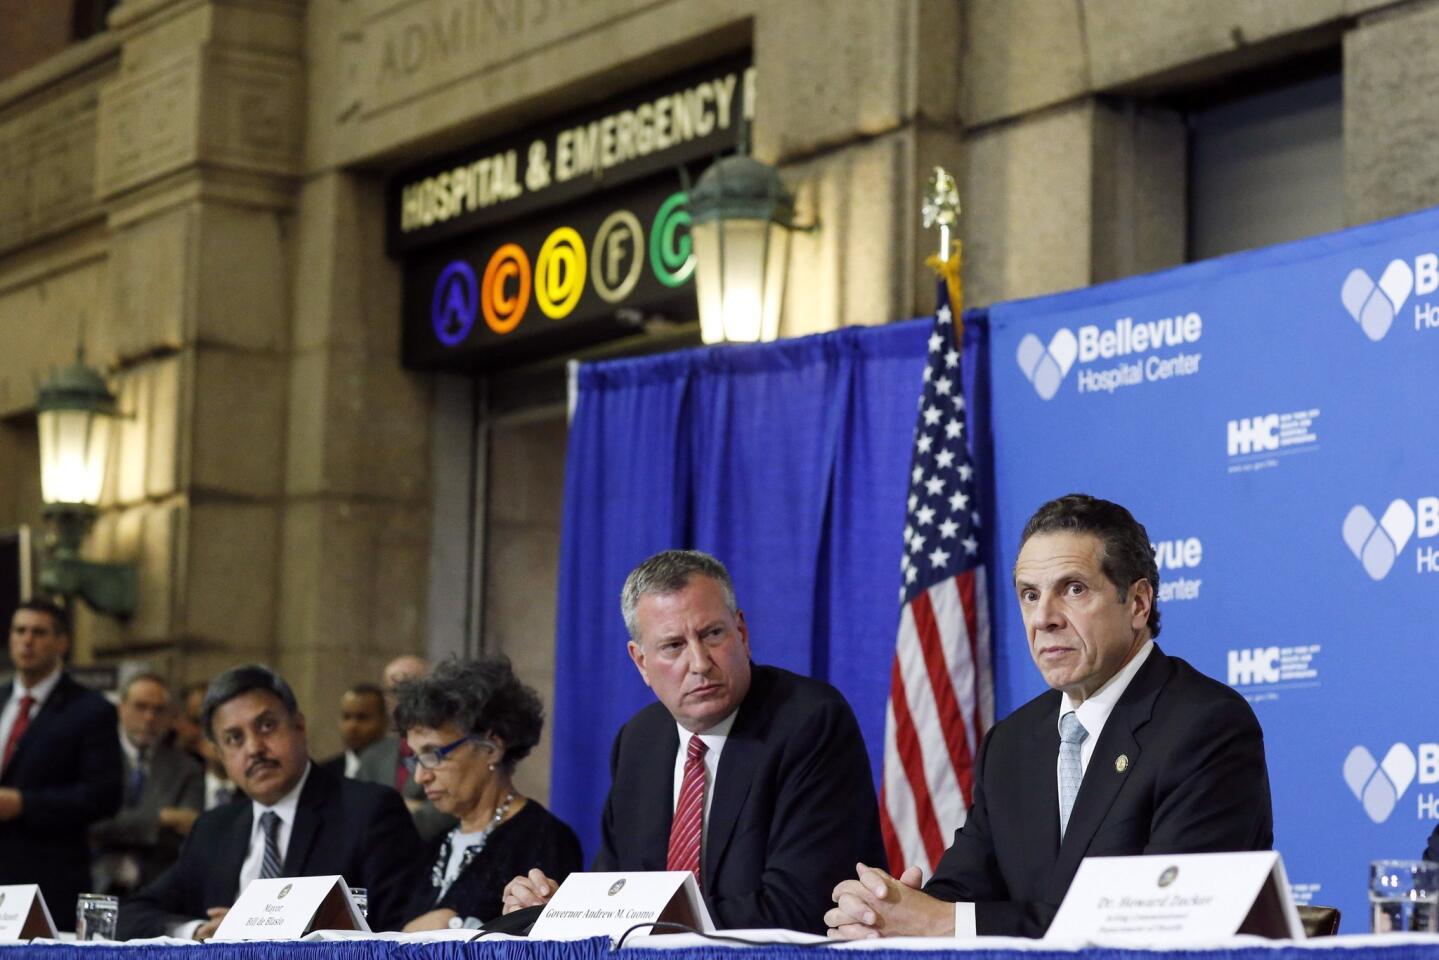 New York Mayor de Blasio and New York Governor Cuomo attend news conference in Bellevue Hospital in New York